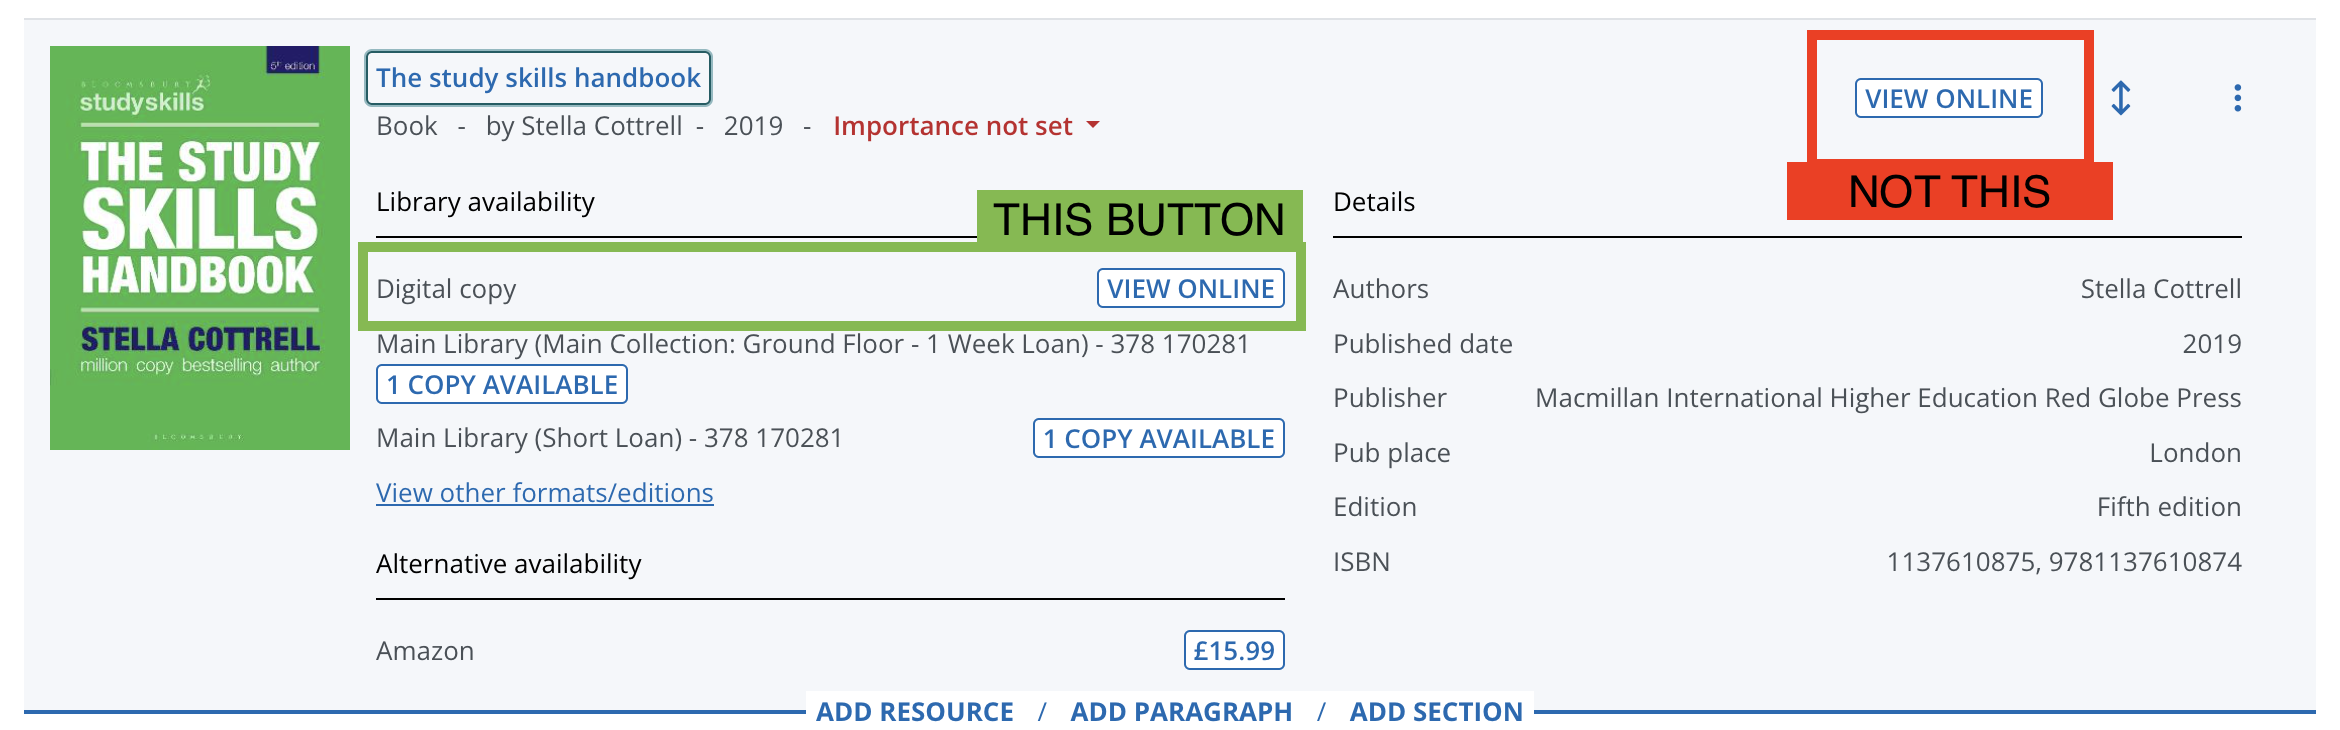 showing the location of digital copy view online button